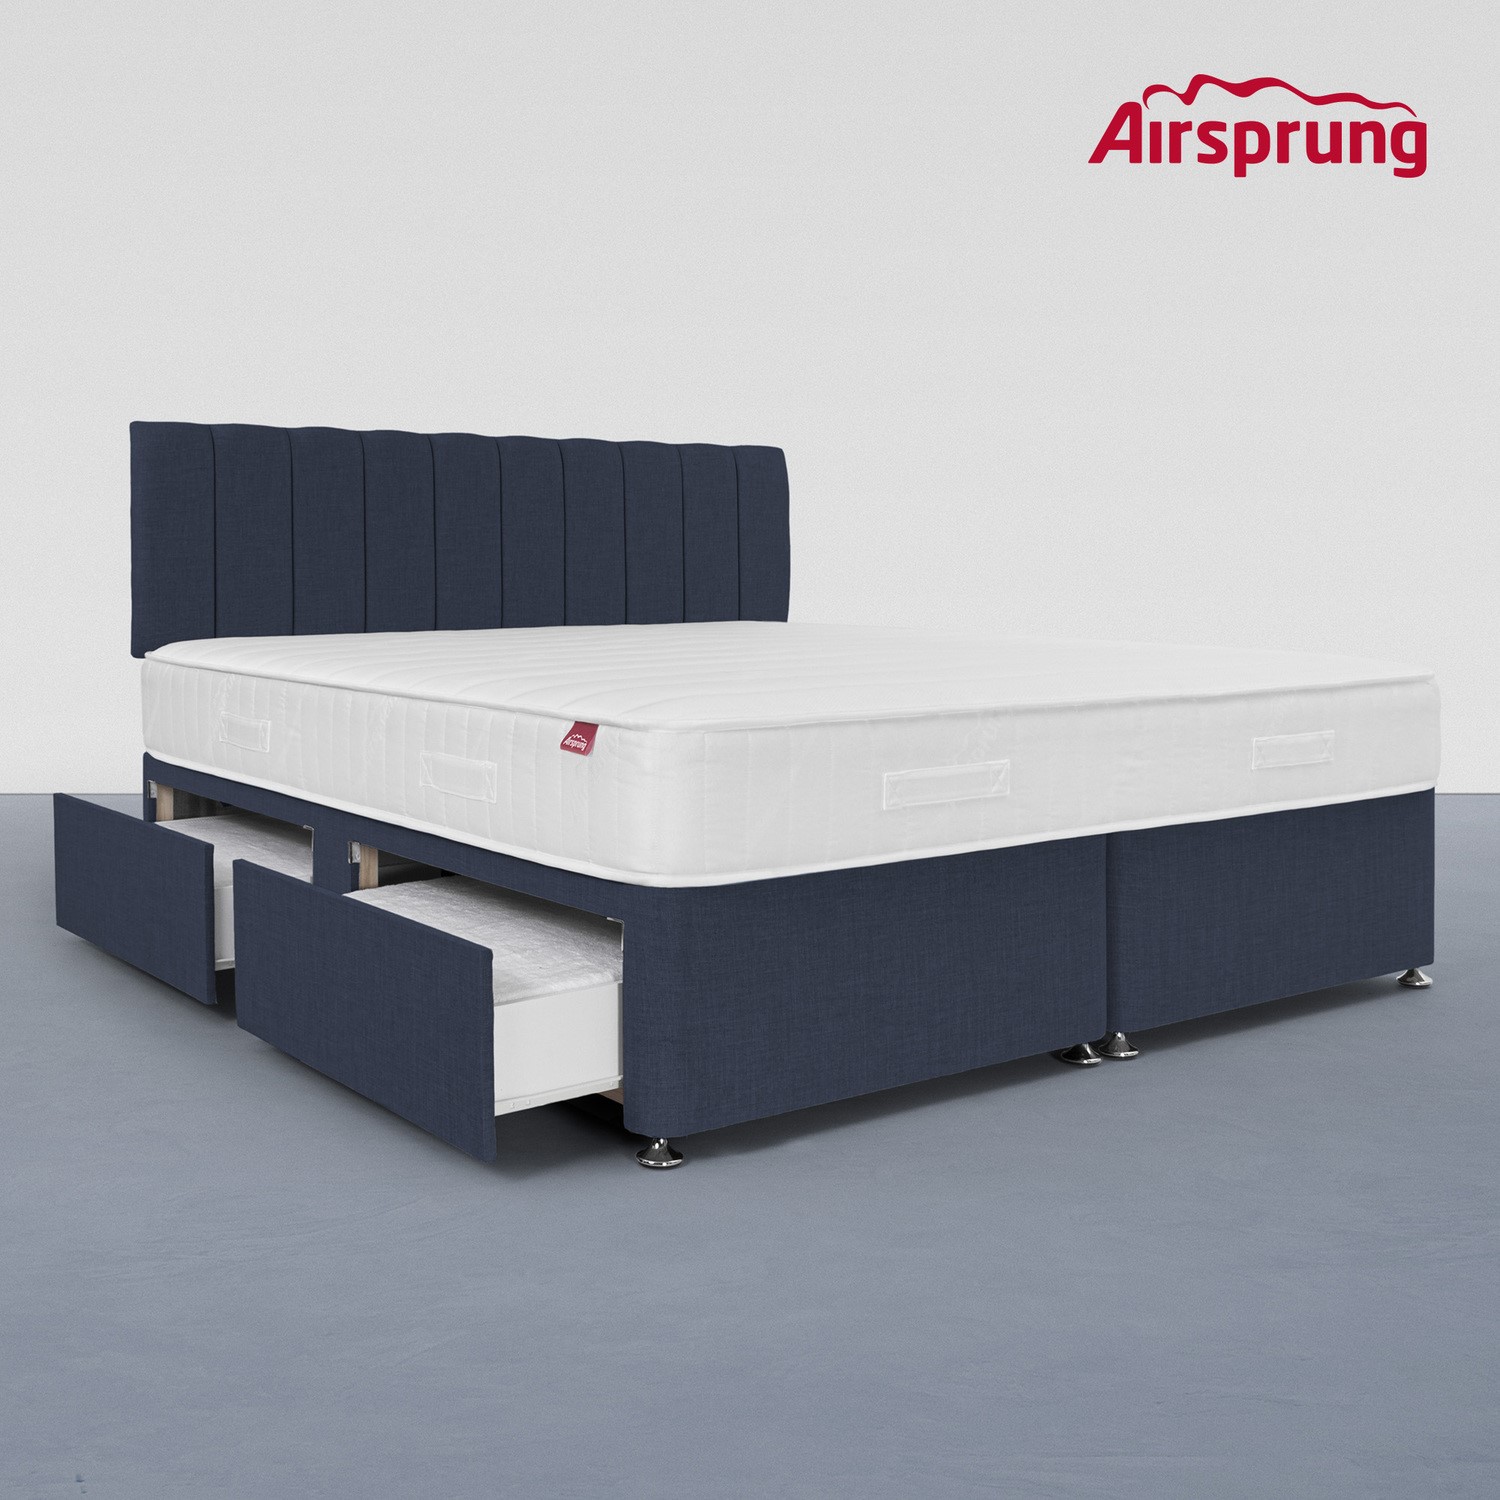 Read more about Airsprung super king 4 drawer divan bed with hybrid mattress midnight blue